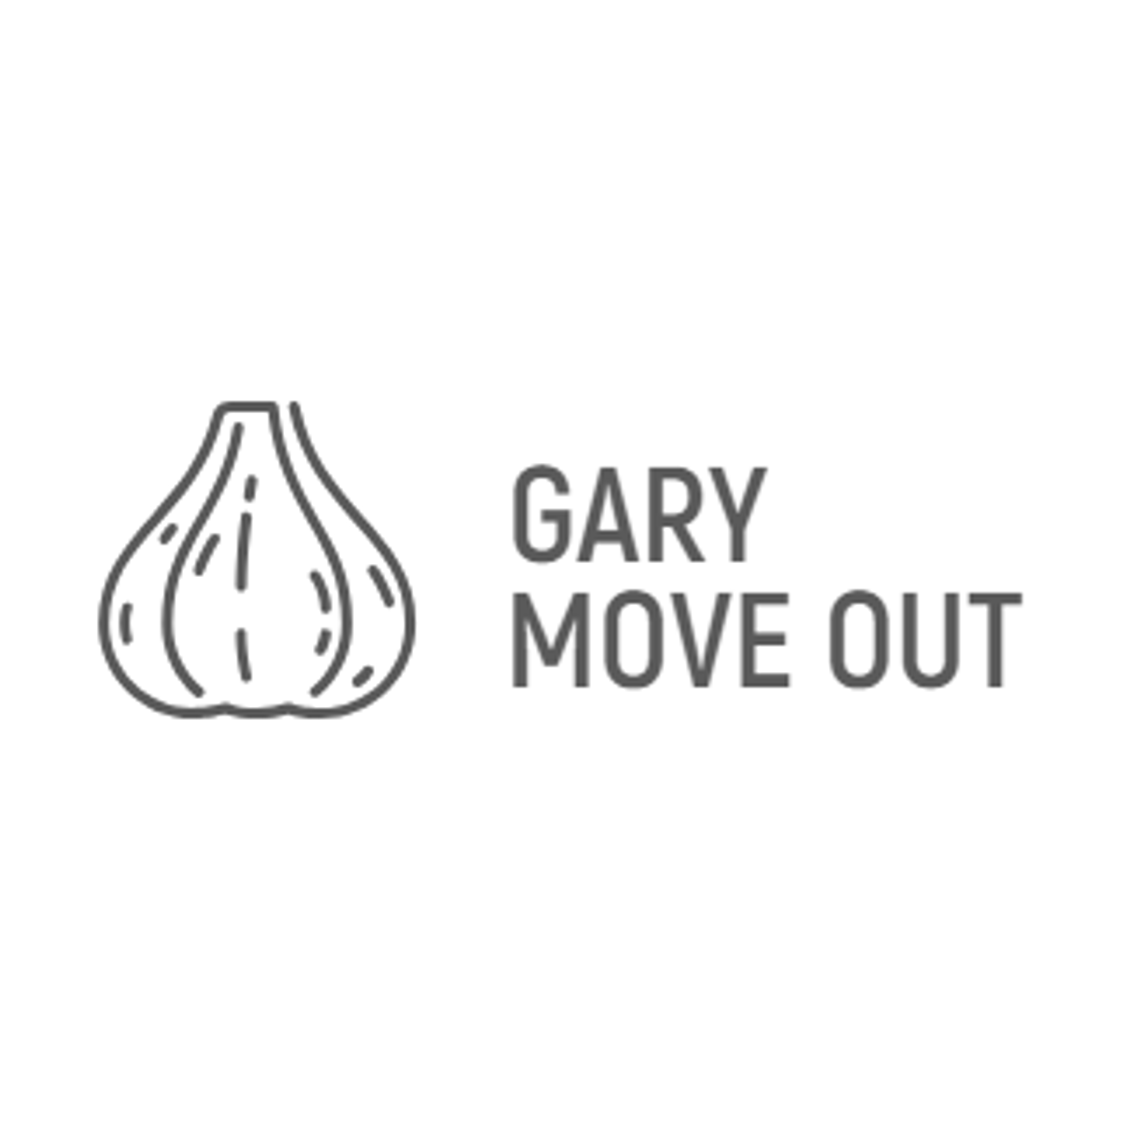 Gary Move Out